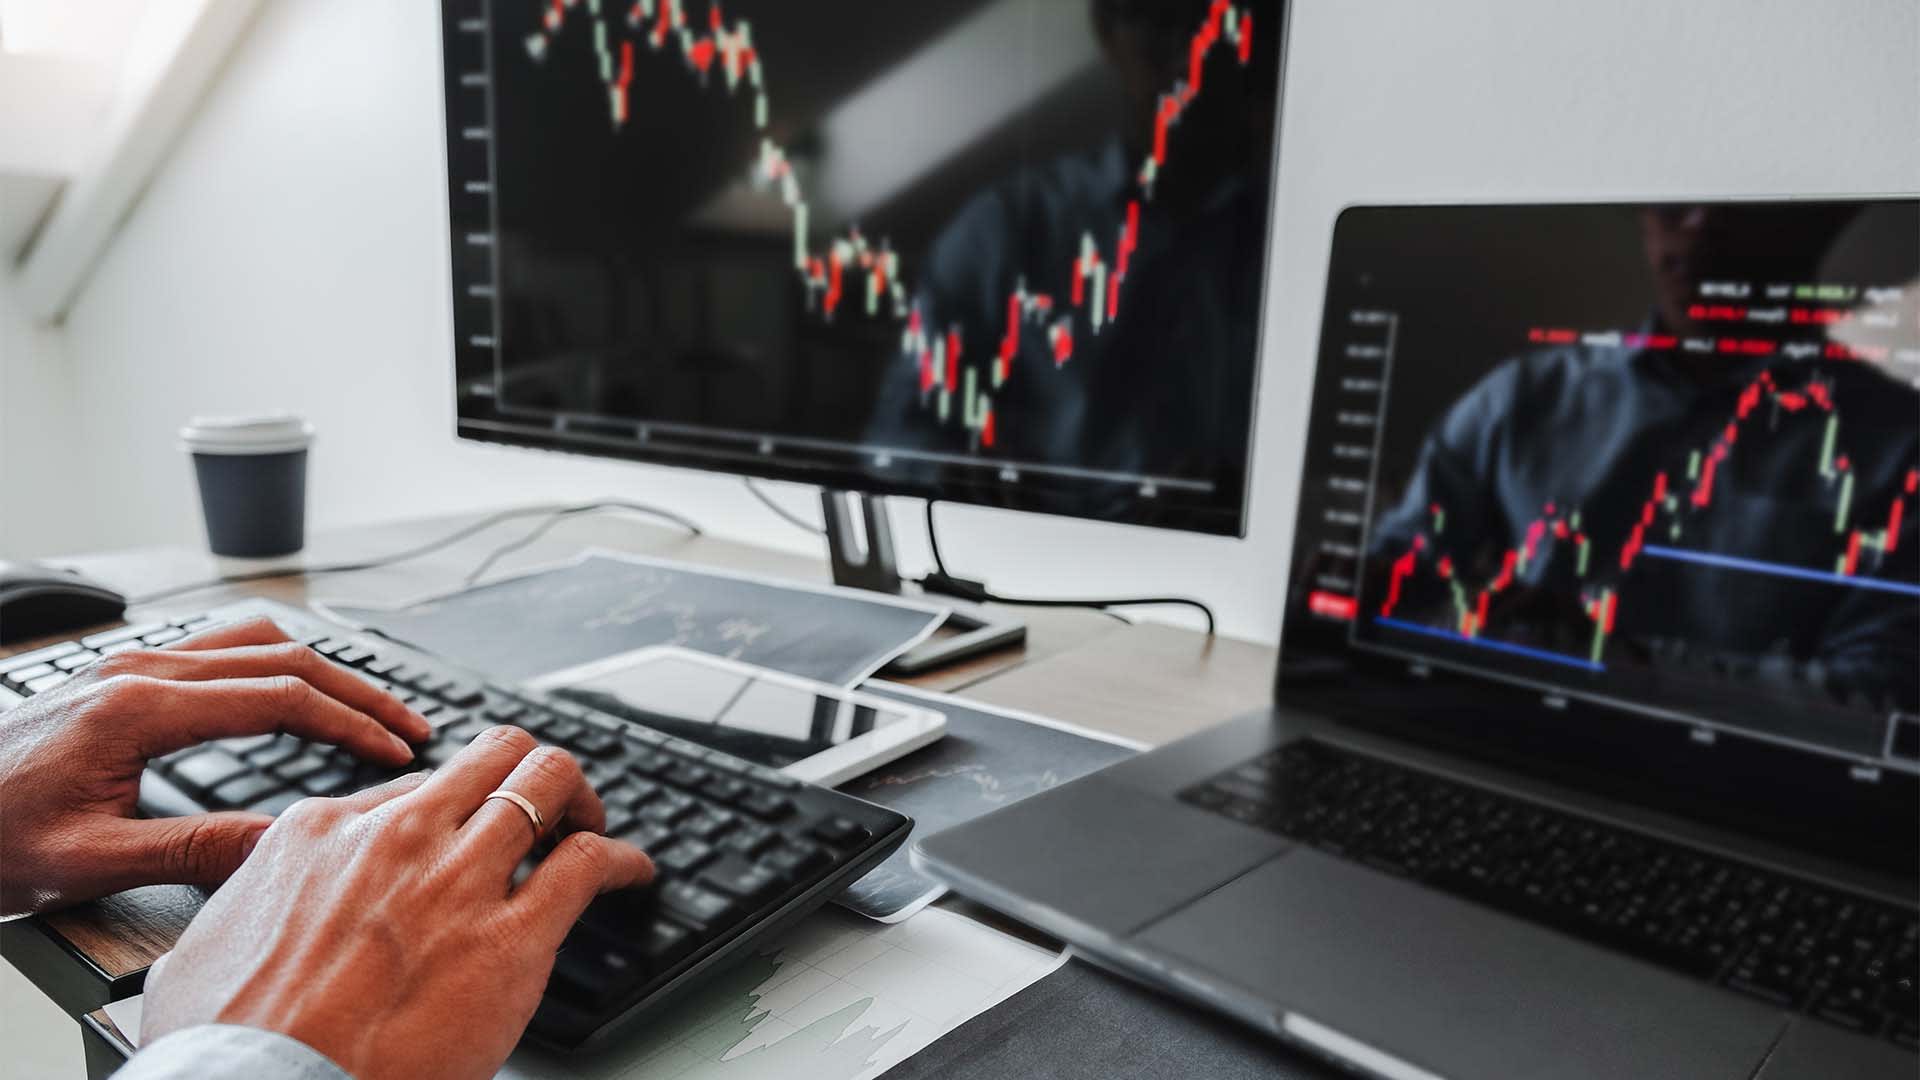 3 High-Frequency Trading Techniques to Run Your Business Like a Hedge Fund